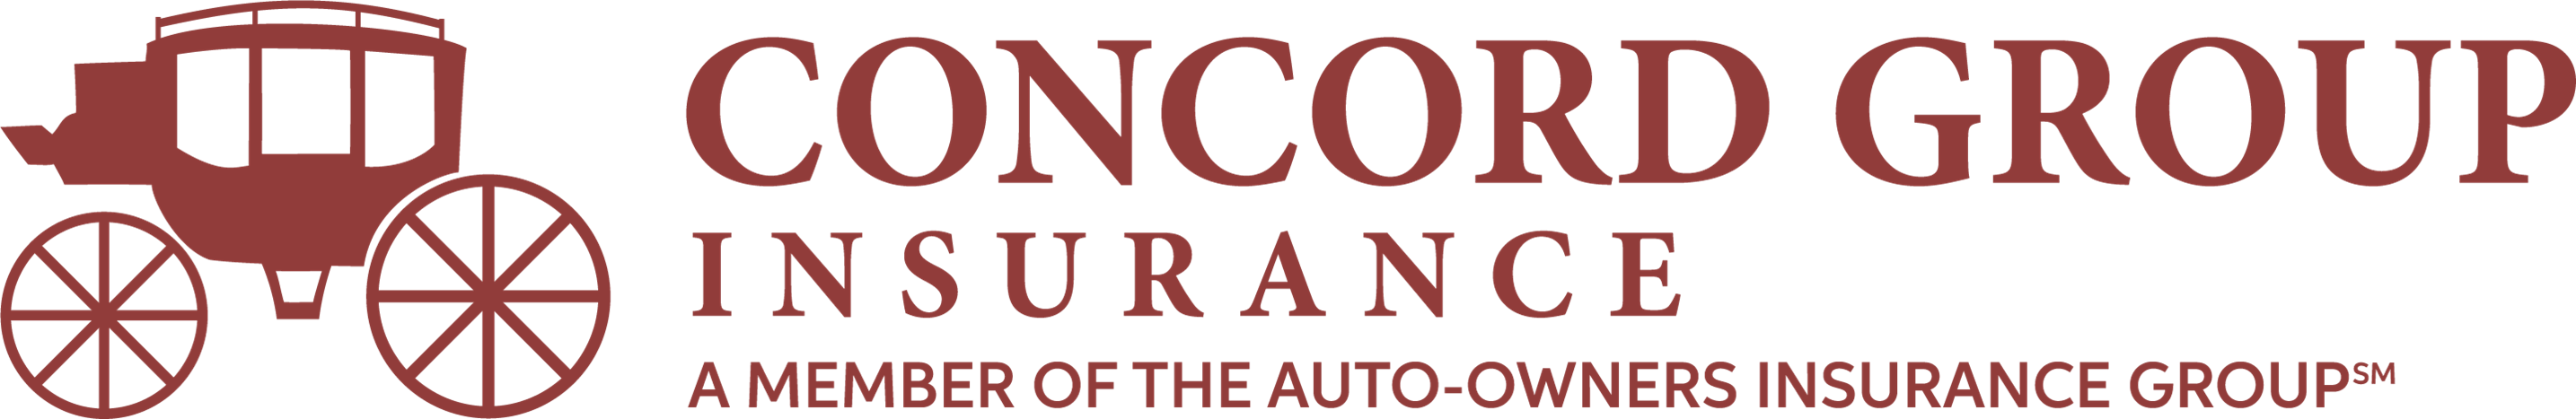 Auto-Owners Logo - Concord Group Insurance - Concord Group Insurance